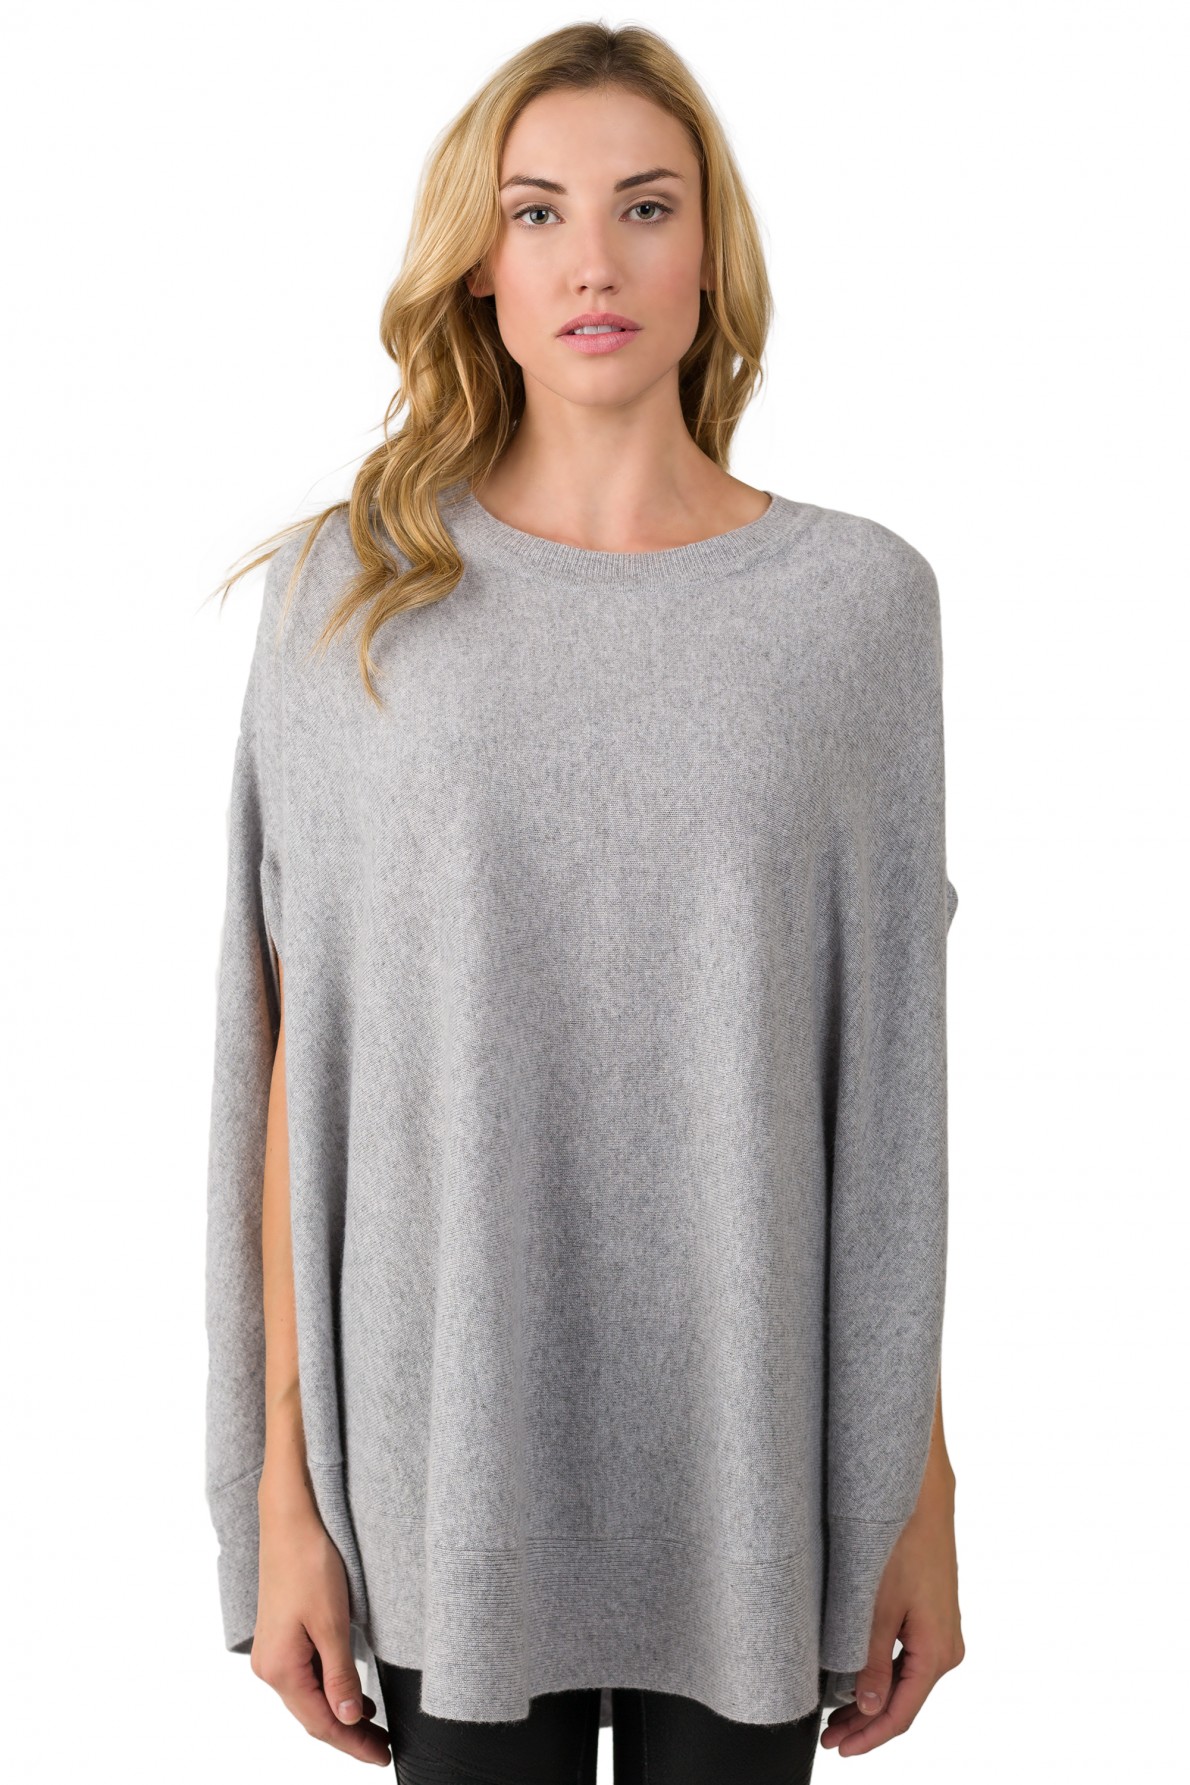 gray cashmere oversized laid-back poncho sweater front view AVZOJWM